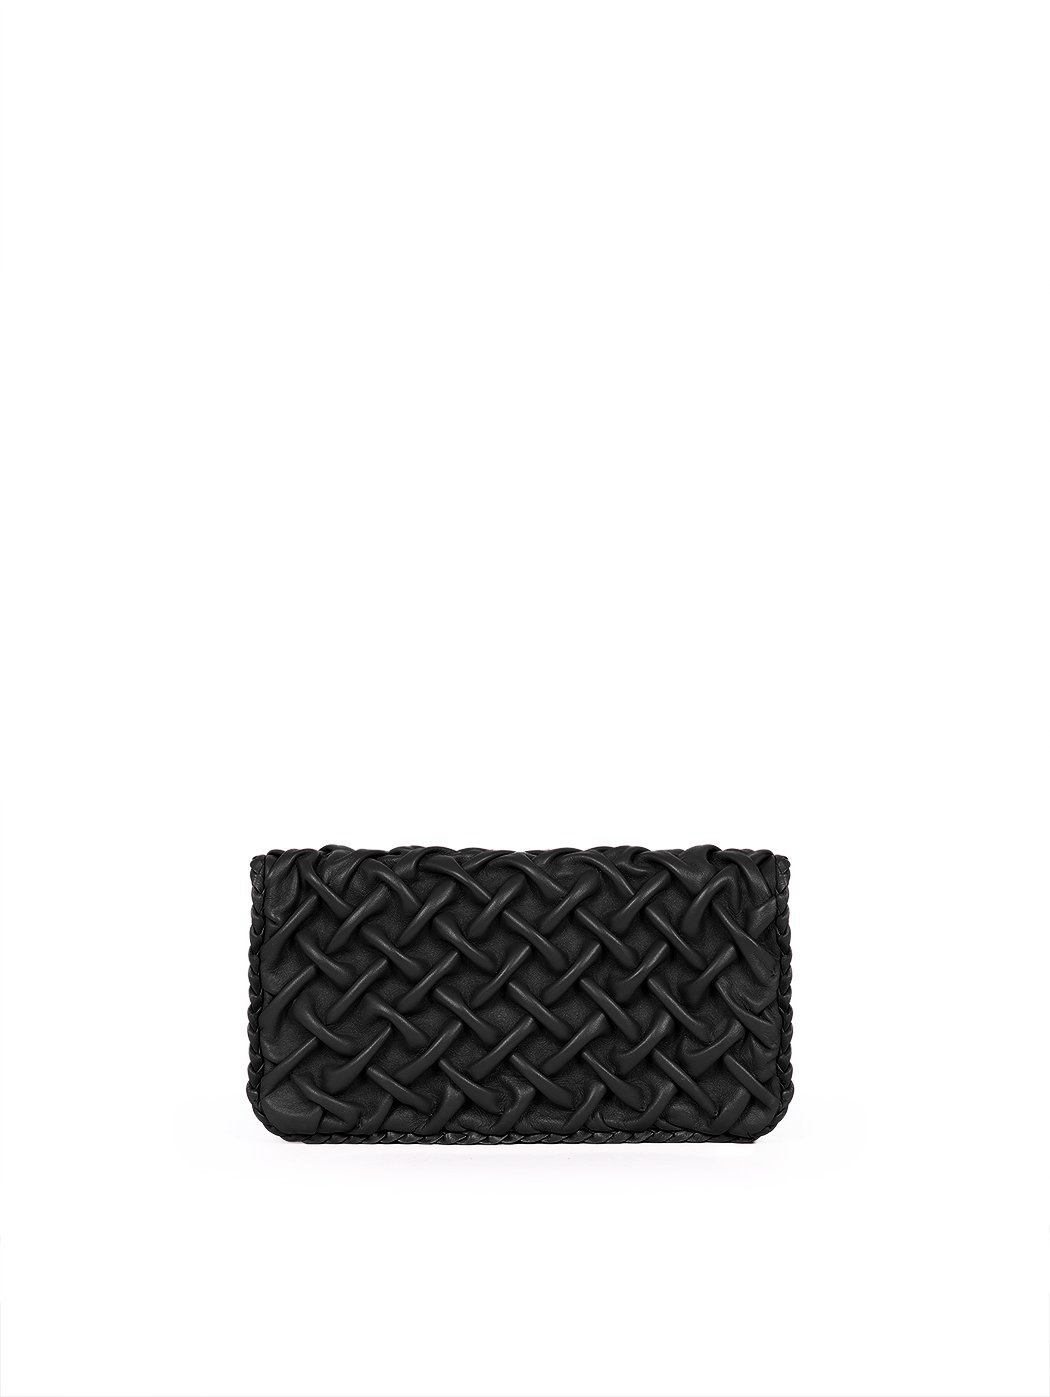 Foldover Crossbody Quilted Weave Clutch Leather Black